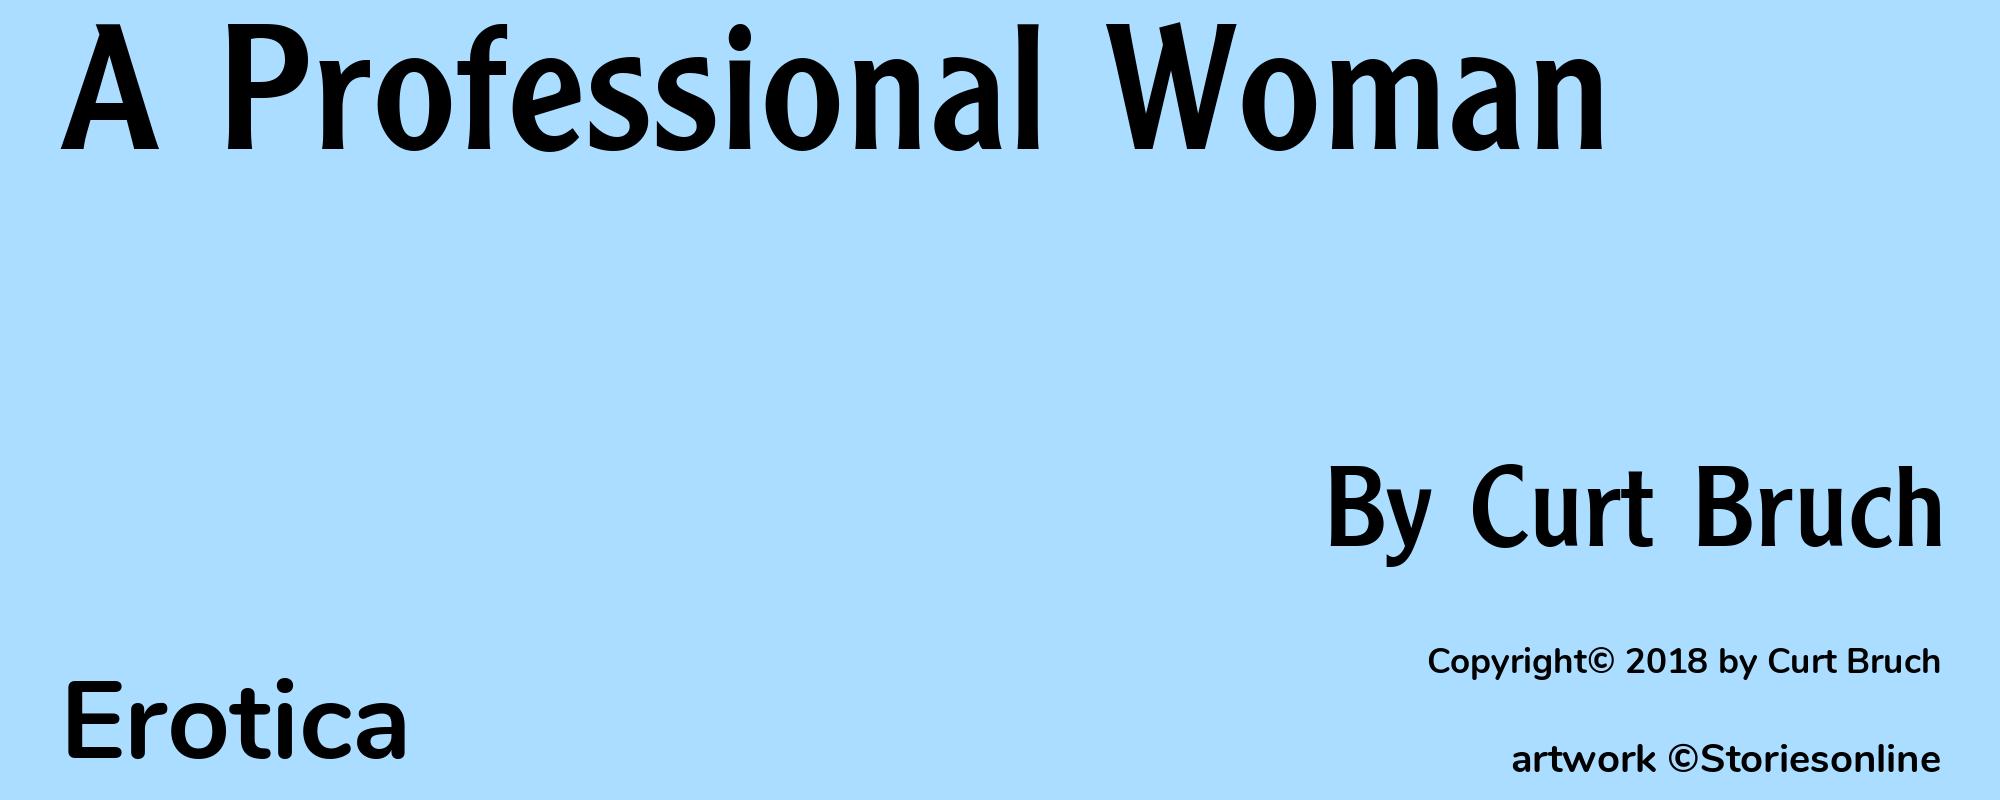 A Professional Woman - Cover